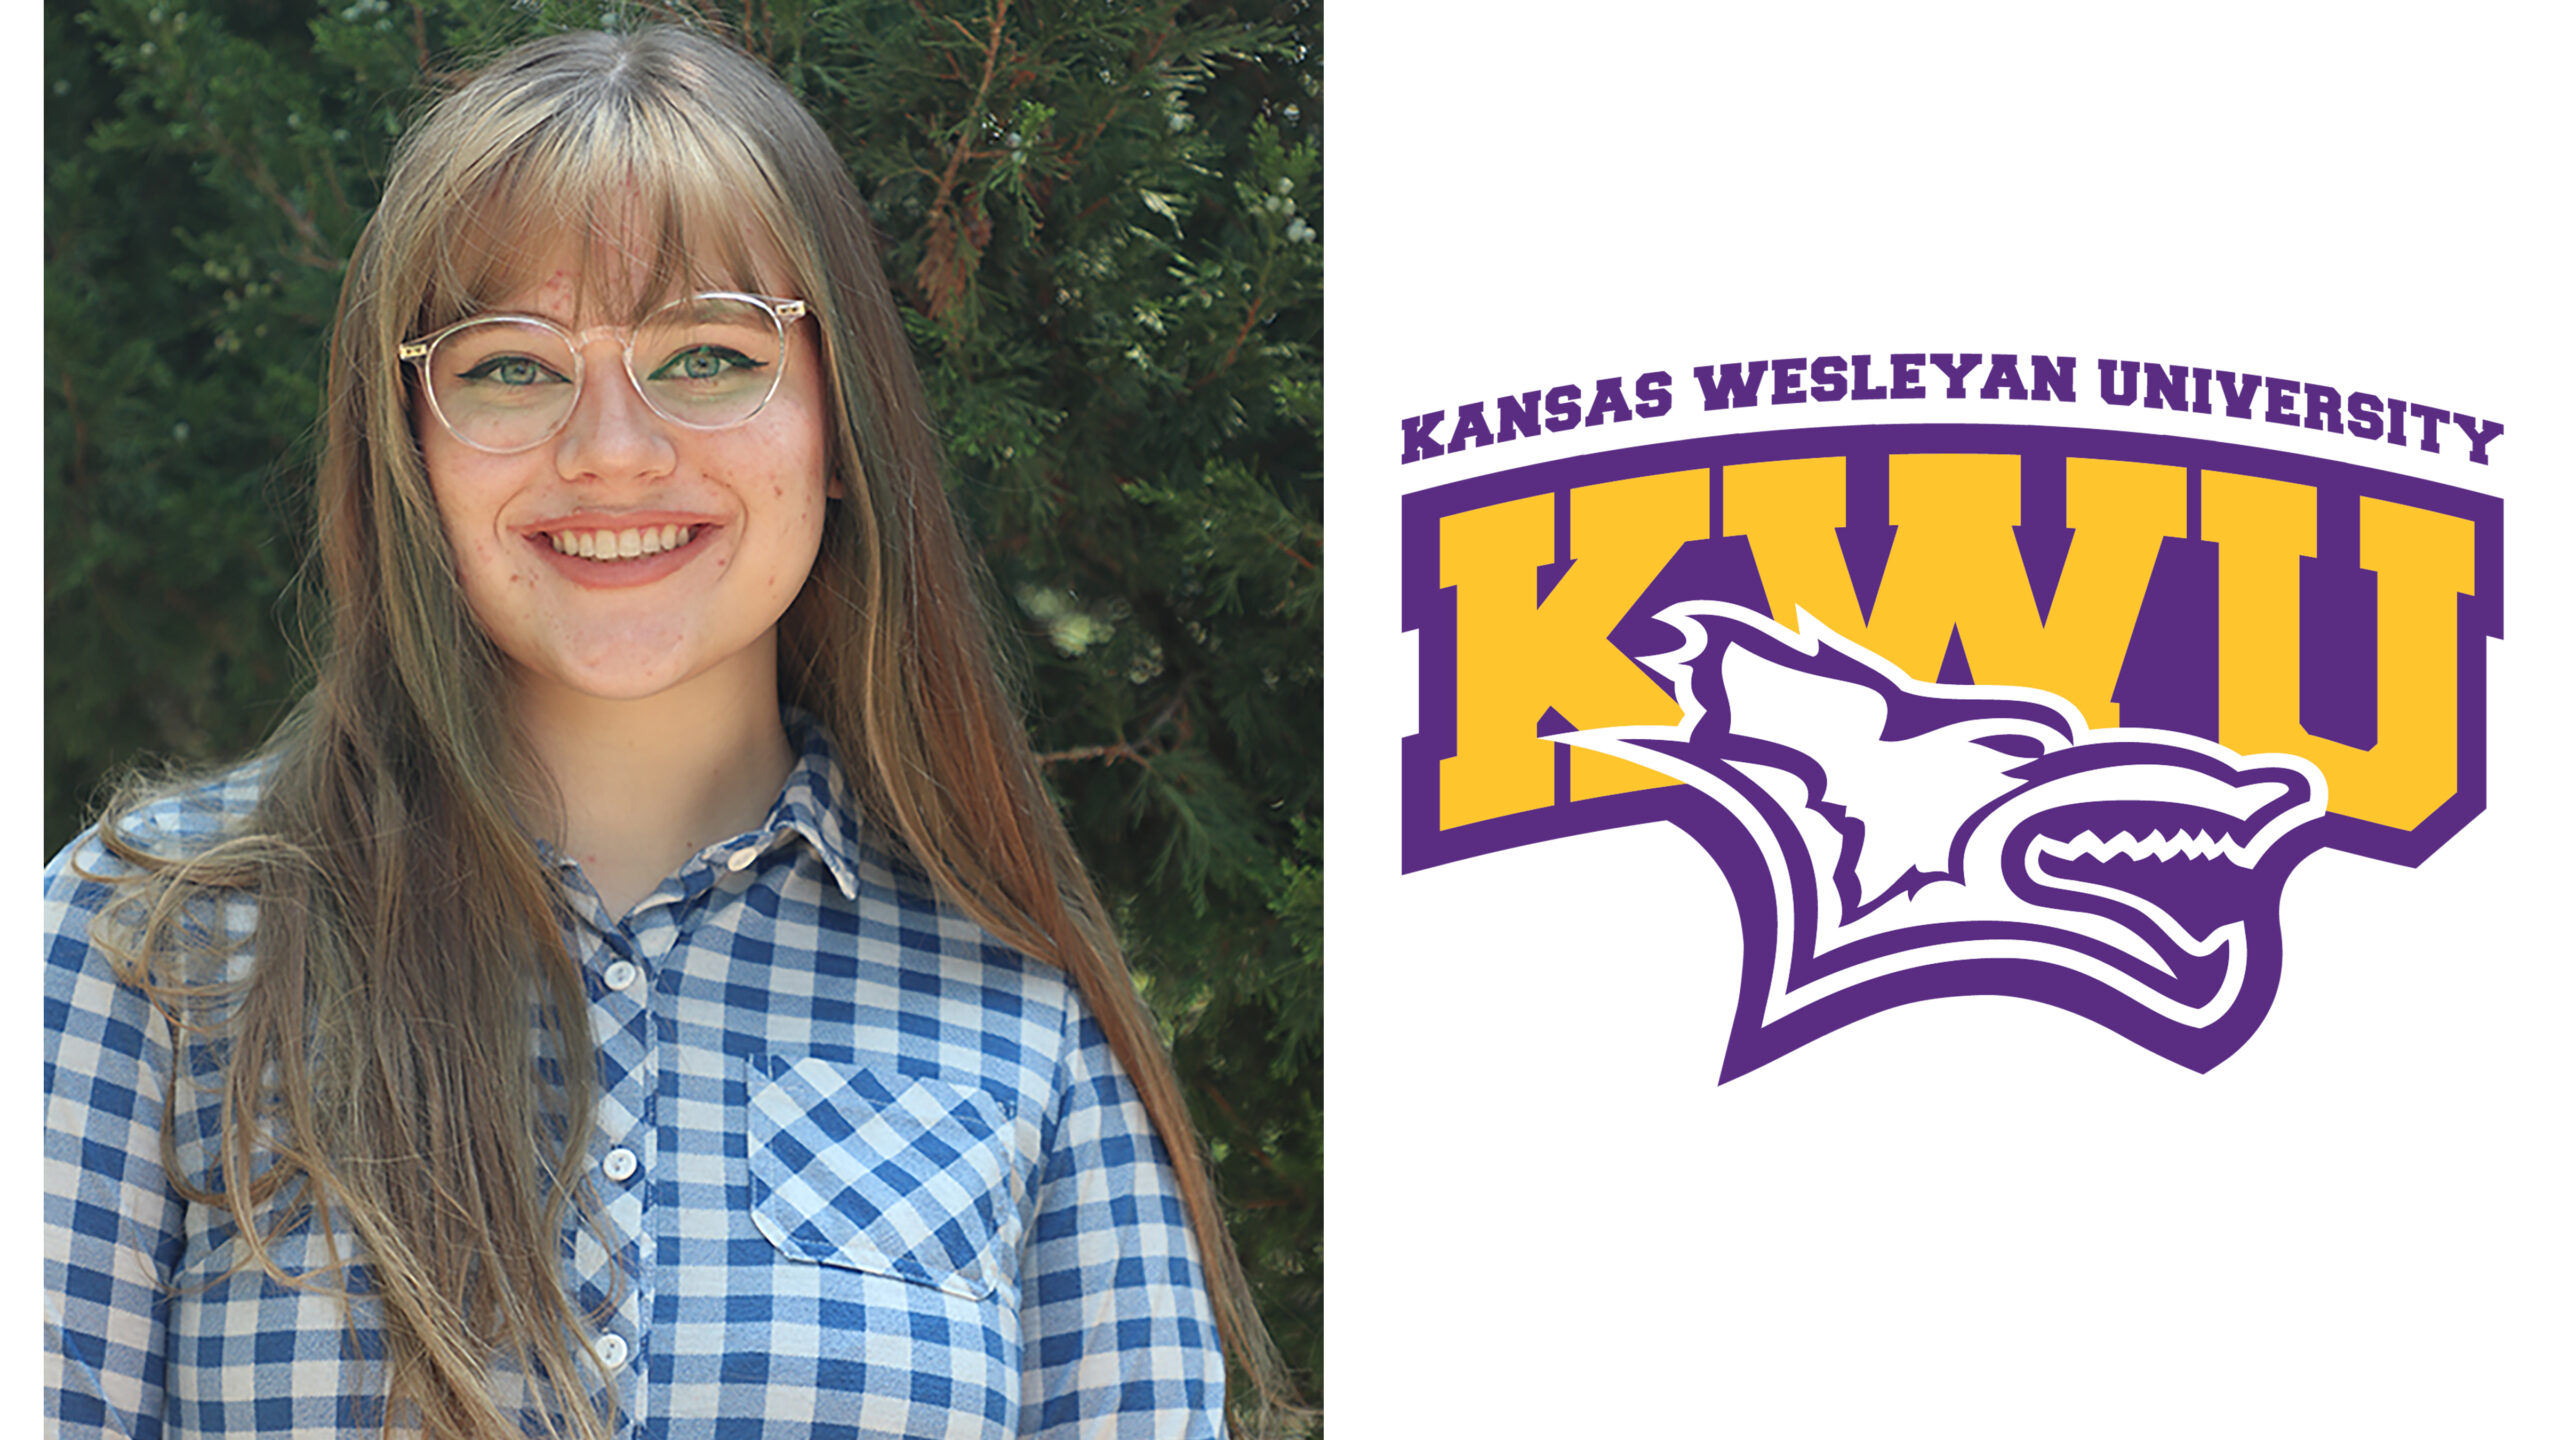 KWU Student Selected to Participate in Discussion on High School Sports Coverage